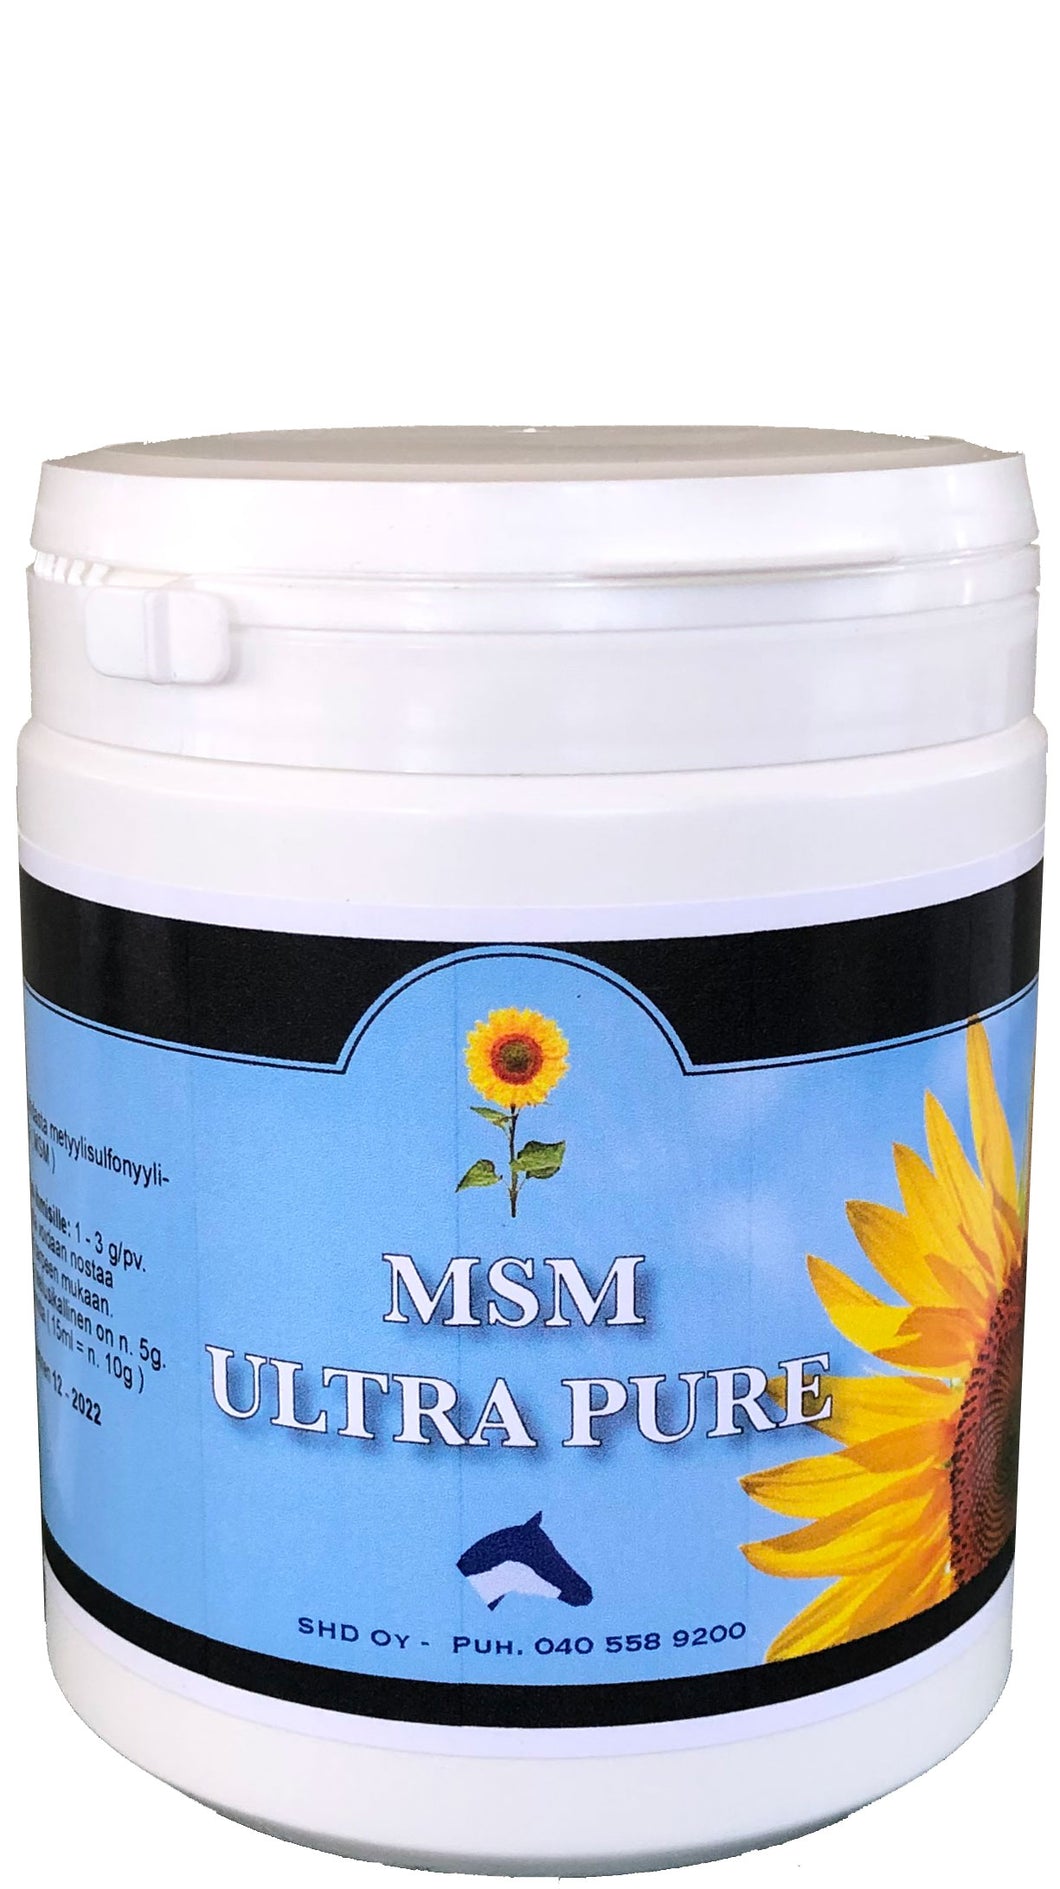 MSM Ultra Pure ihmisille 500 g